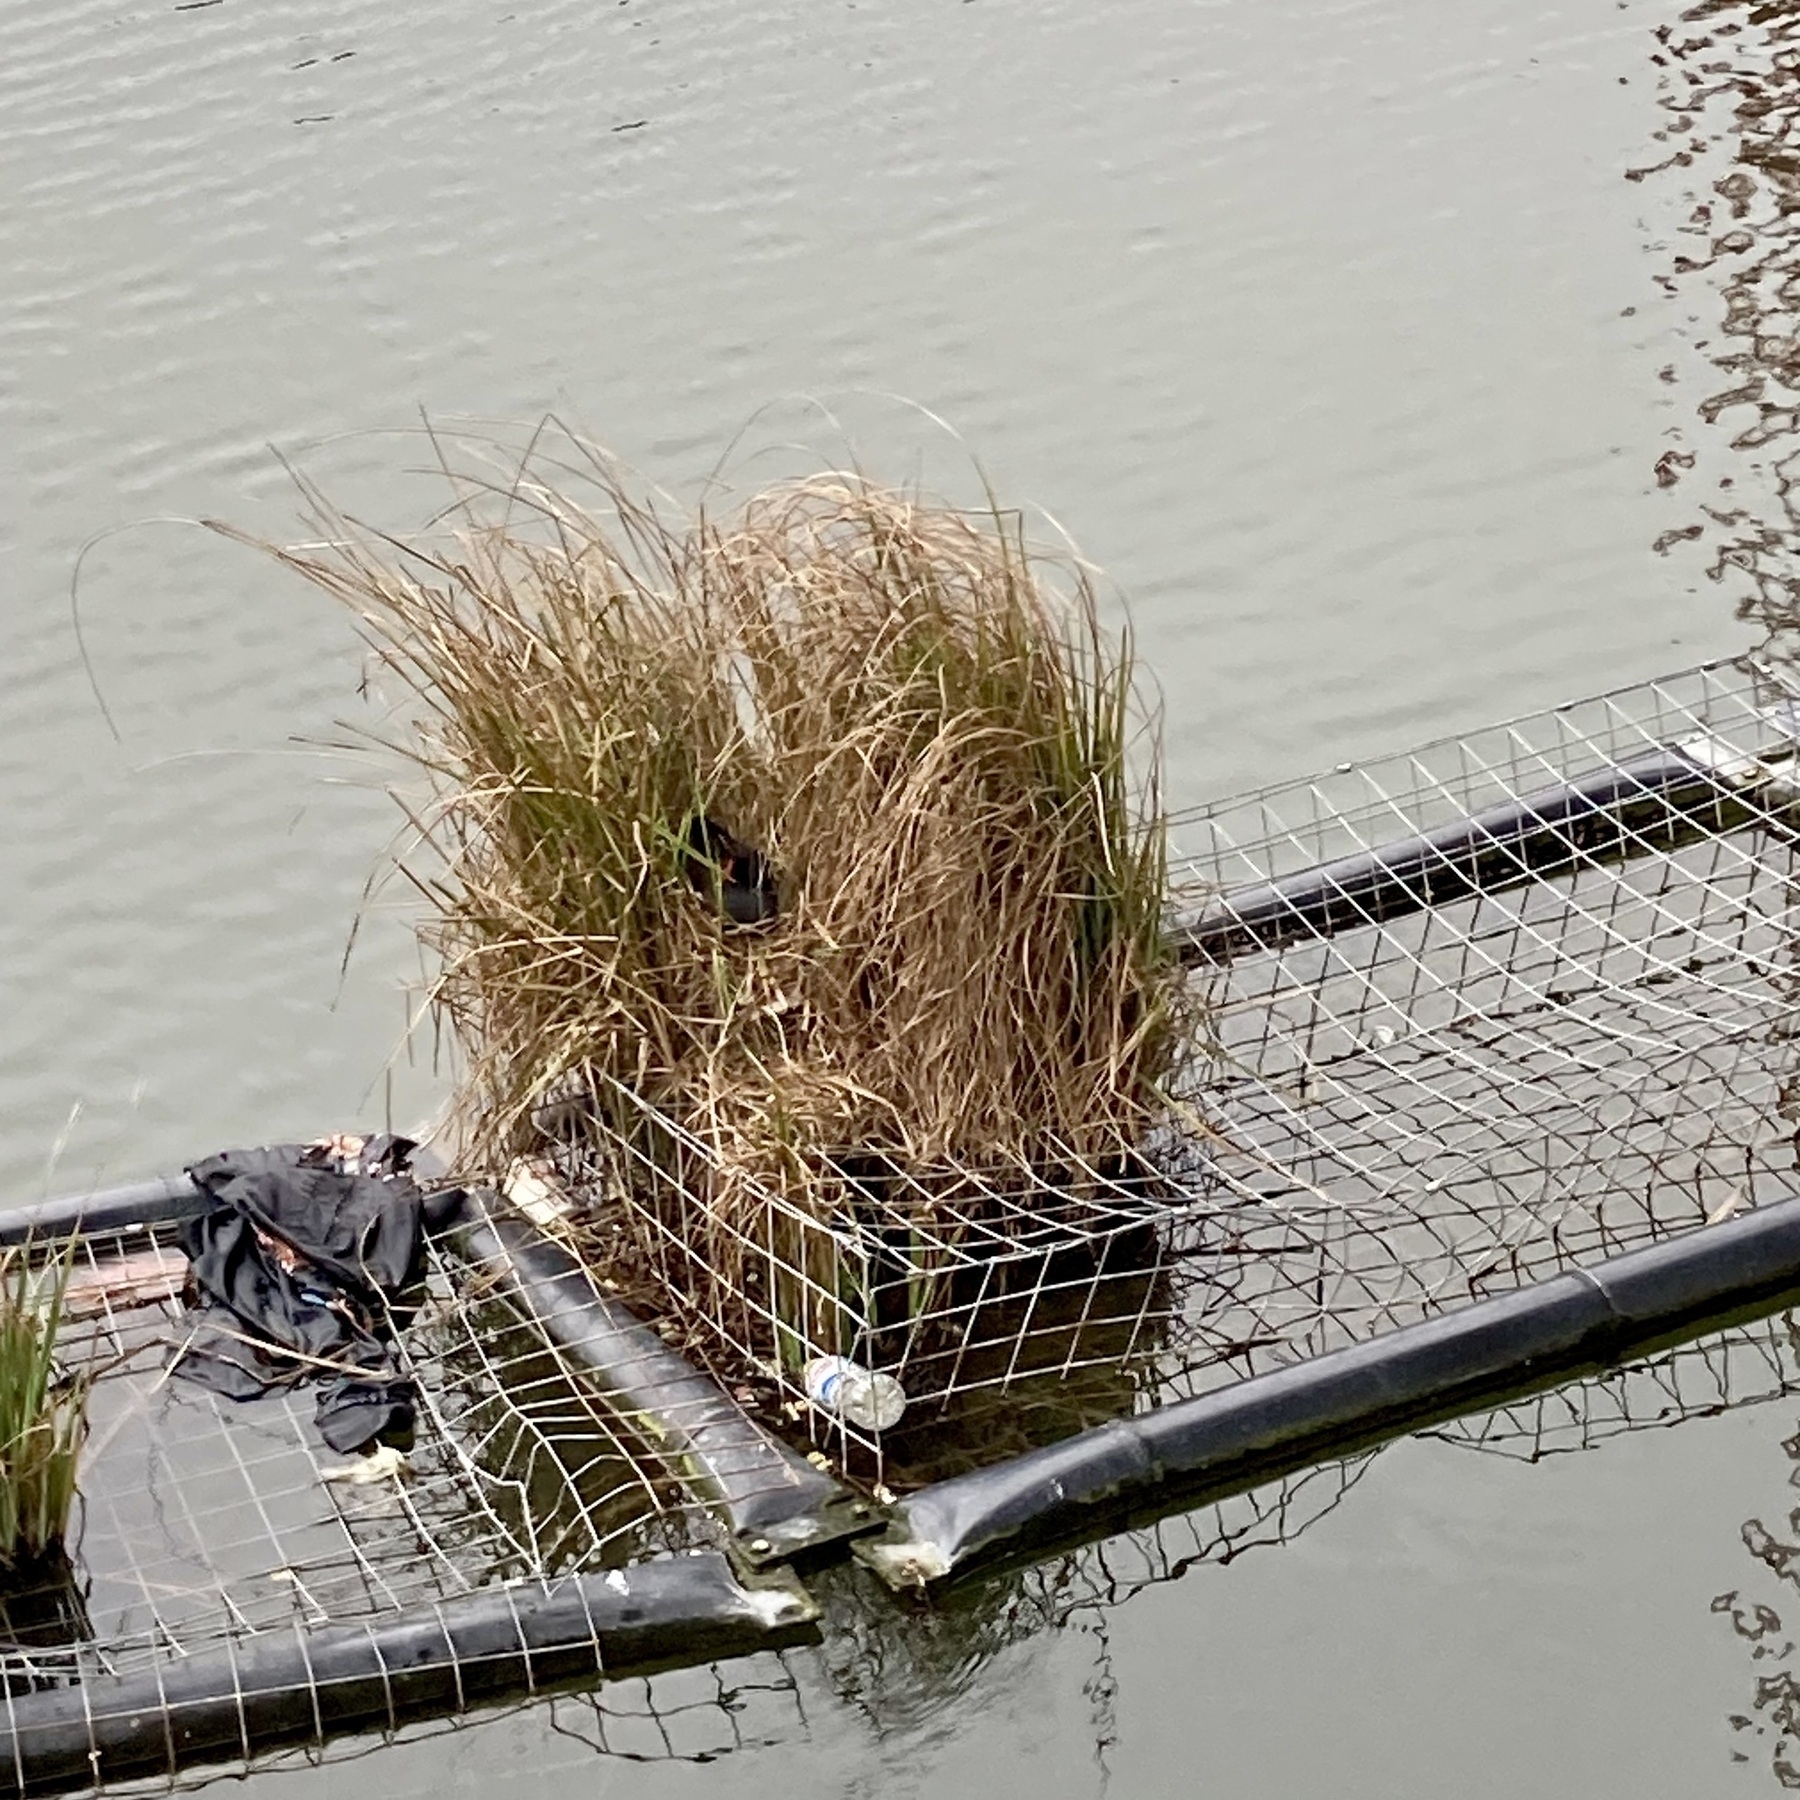 A moorhen is nestled into the reeds on her nest on an artificial island made of black tubes and wire mesh, surrounded by trash